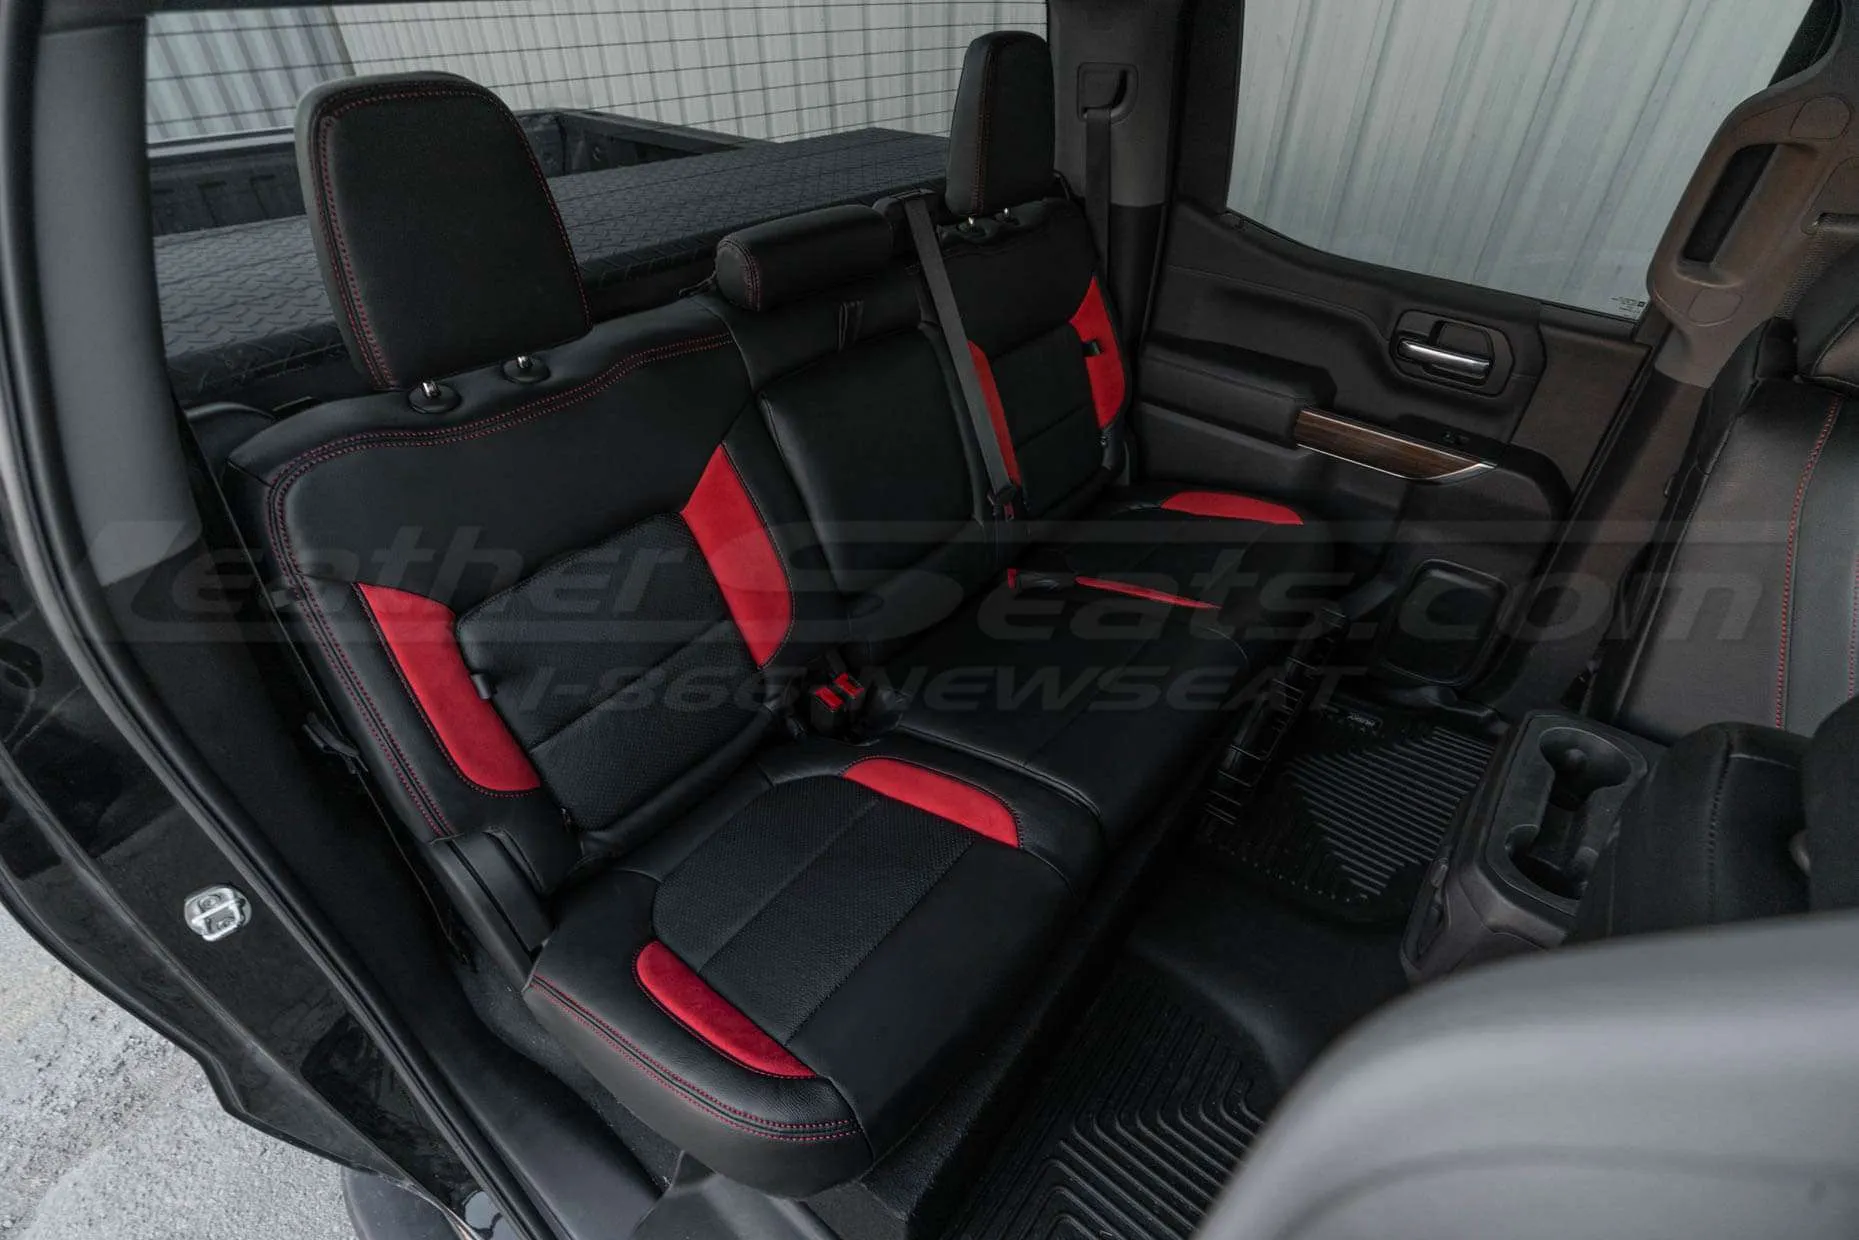 Chevrolet Silverado Installed Leather Seats - Rear seats from passenger side